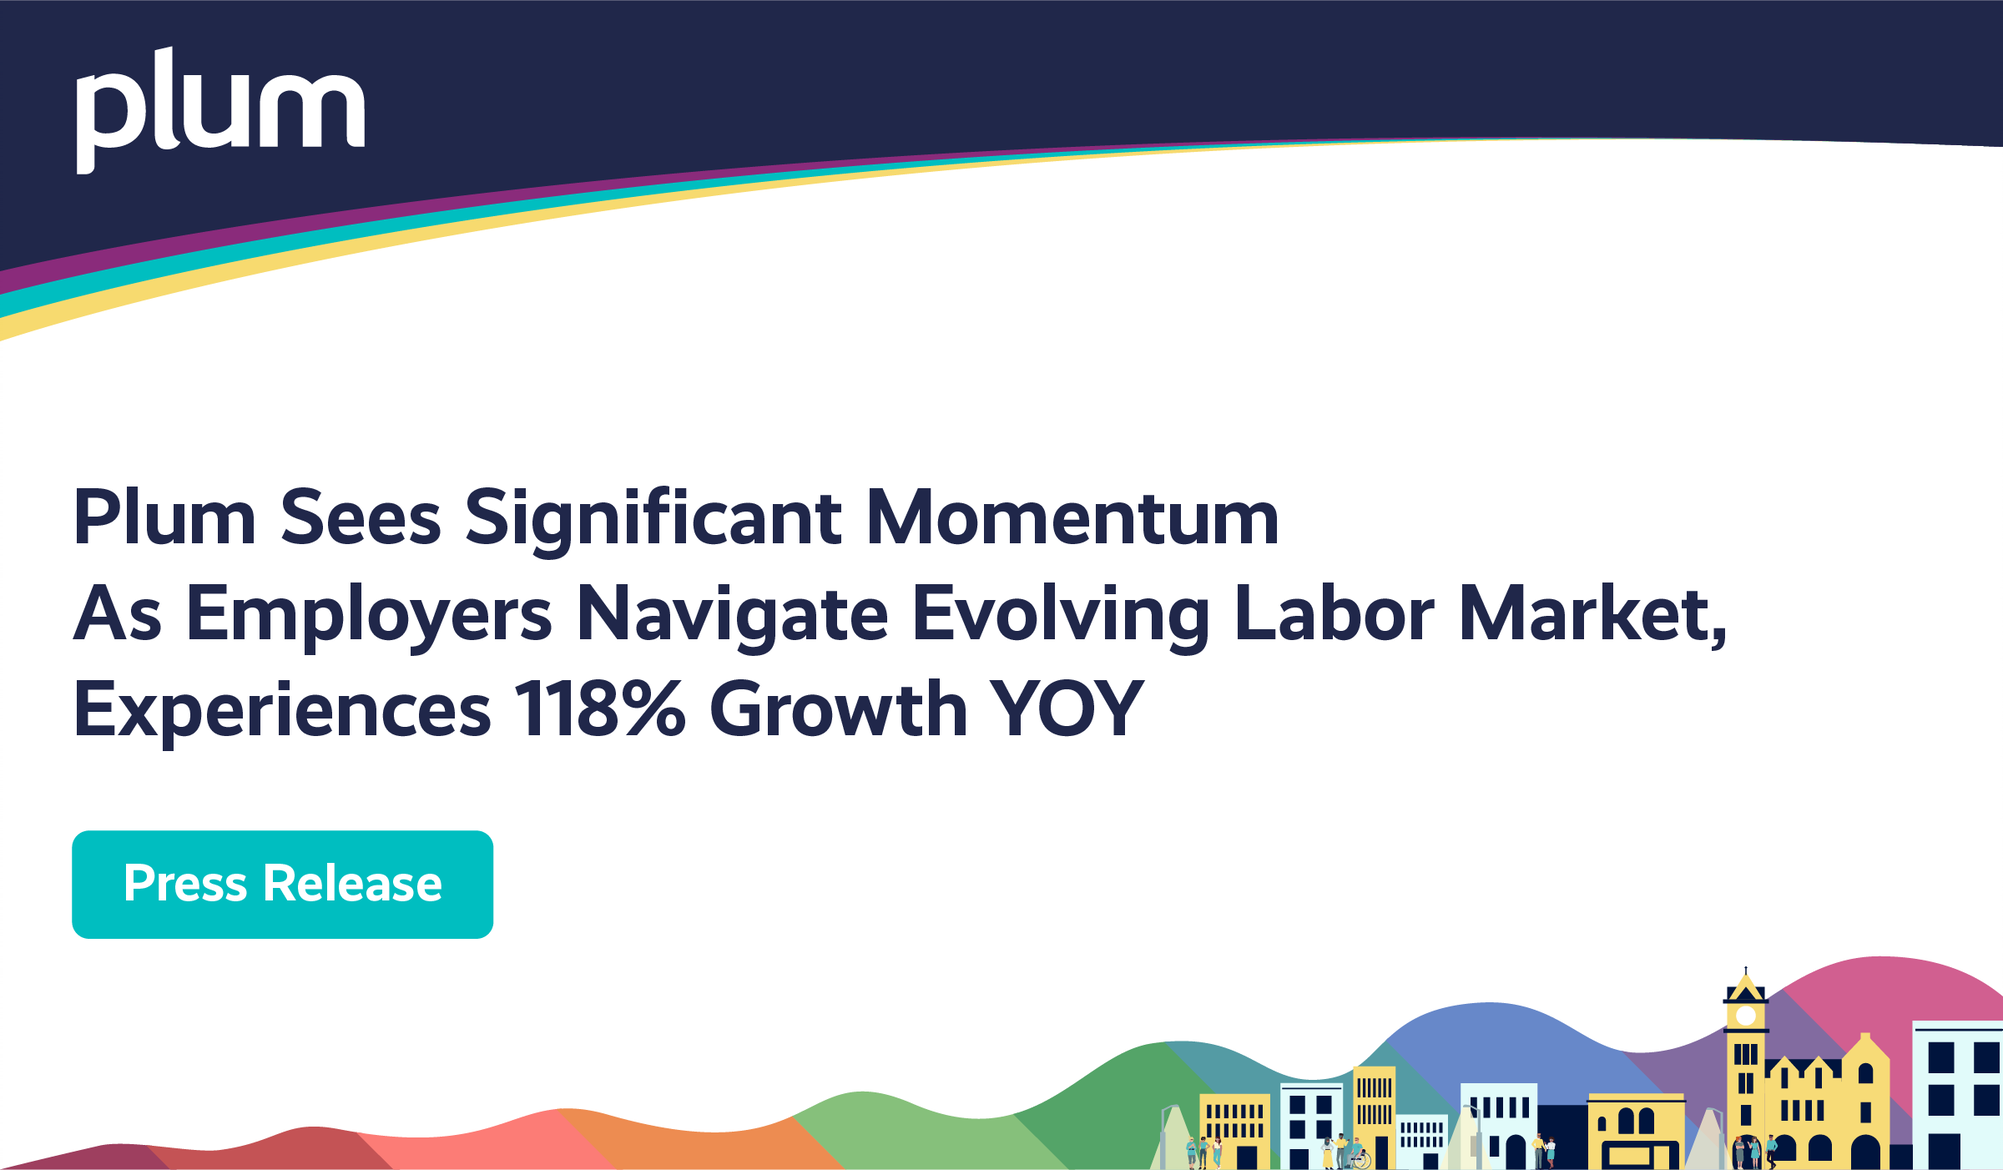 Plum Sees Significant Momentum As Employers Navigate Evolving Labor Market, Experiences 118% Growth YoY